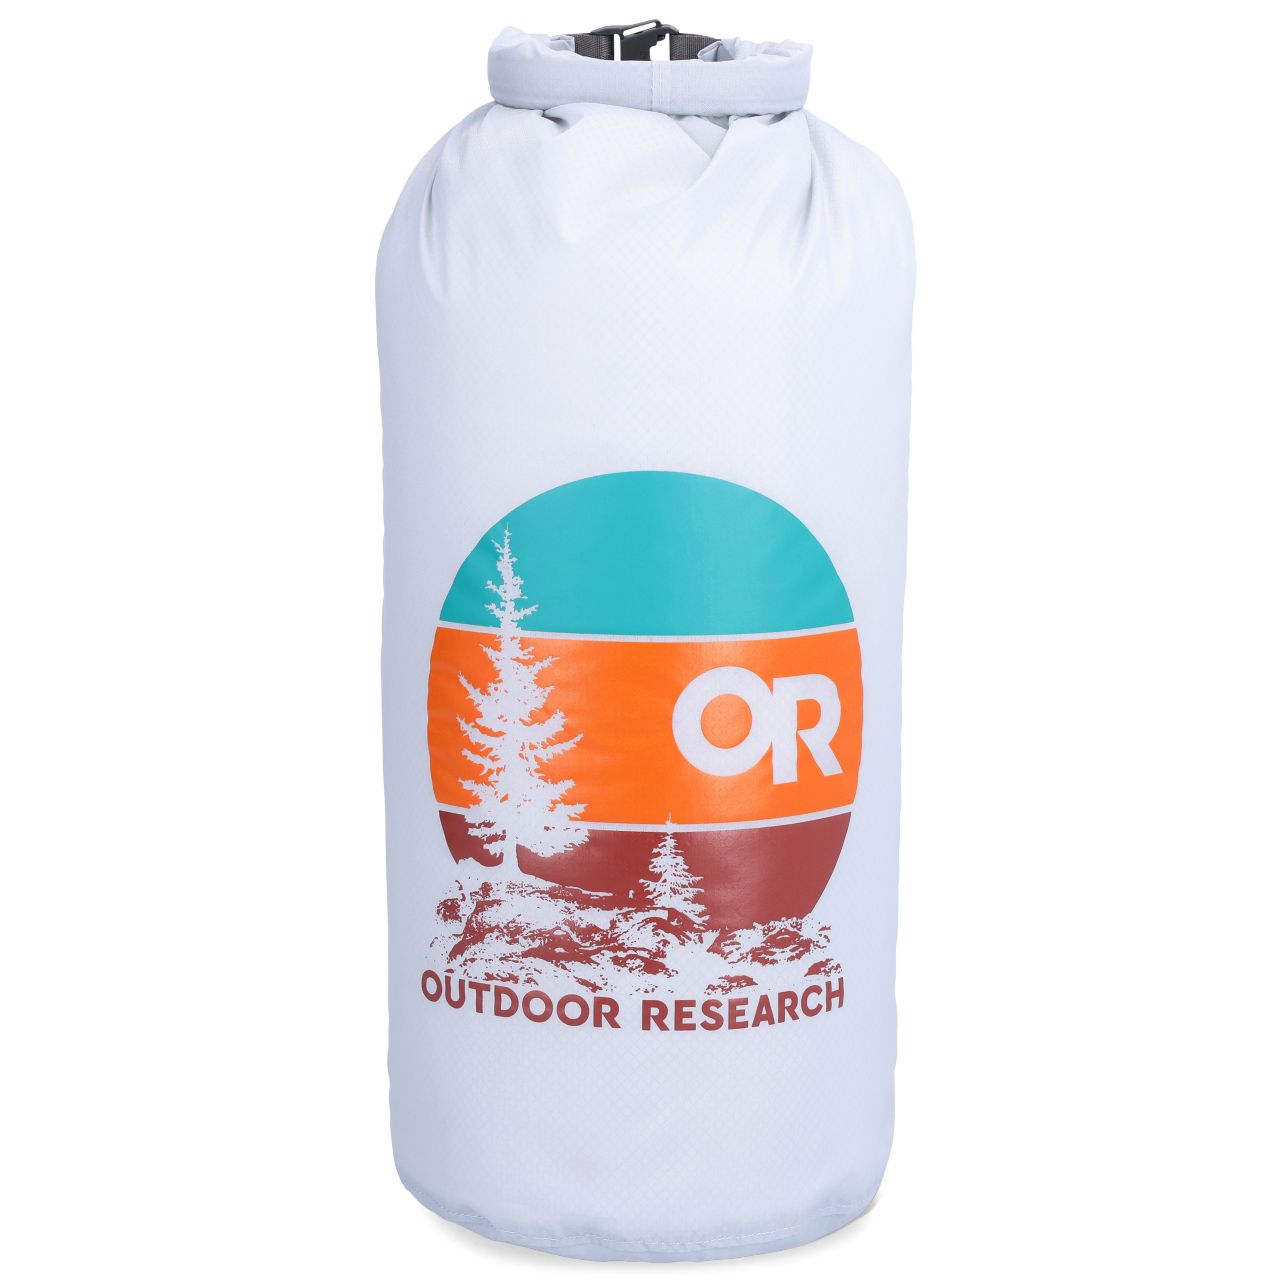 Outdoor Research PackOut Graphic Dry Bag - Sunset / Titanium - 10 Liter